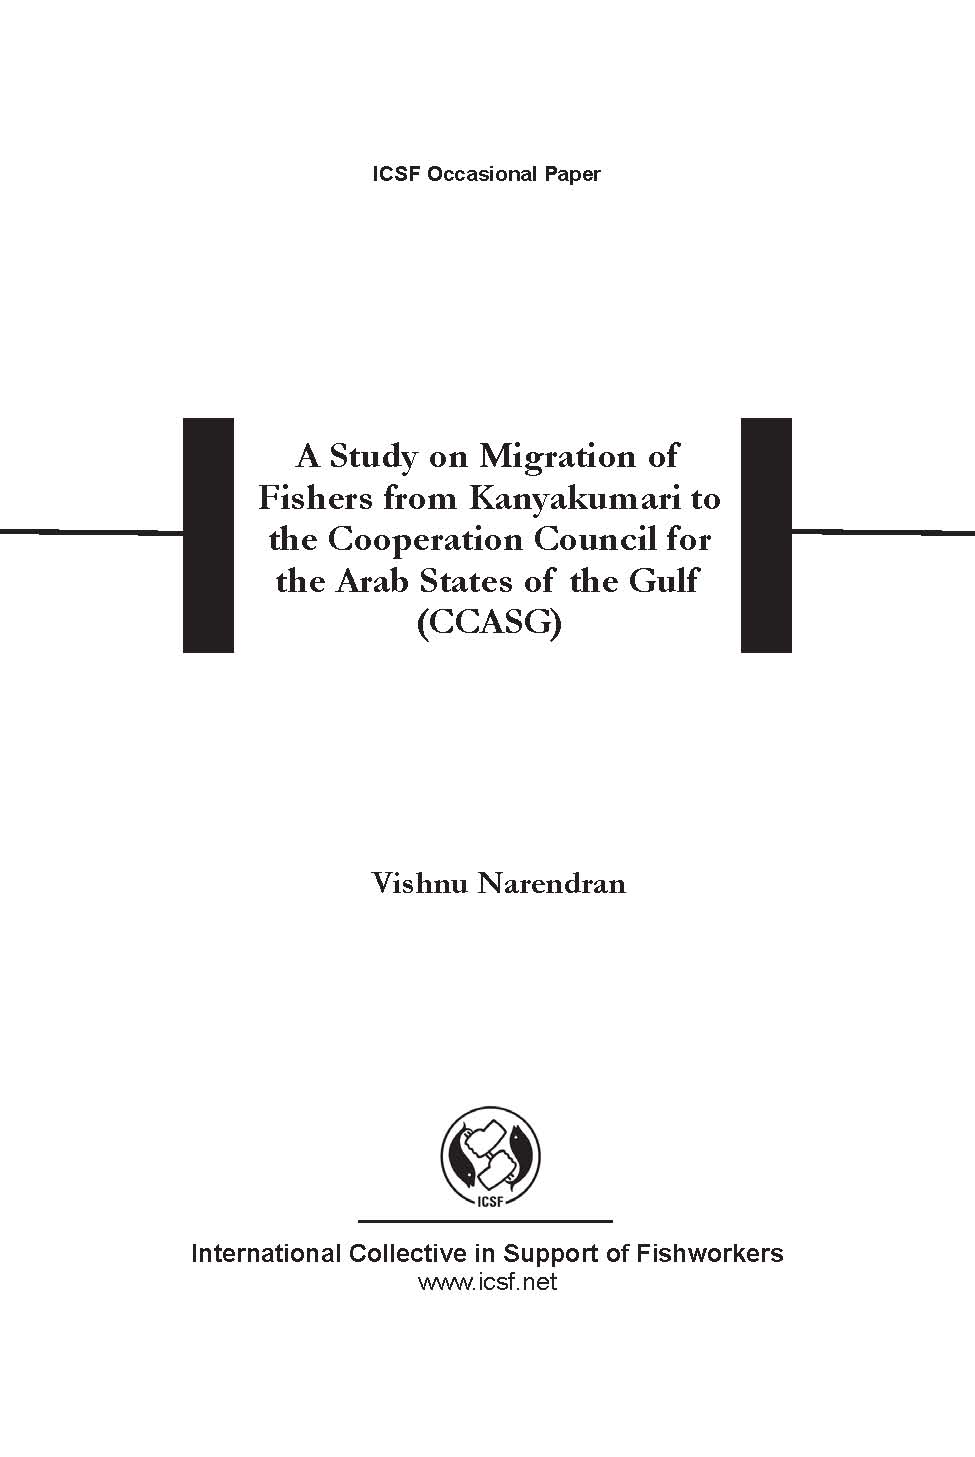 A Study on Migration of Fishers from Kanyakumari to the Cooperation Council for the Arab States of the Gulf (CCASG)